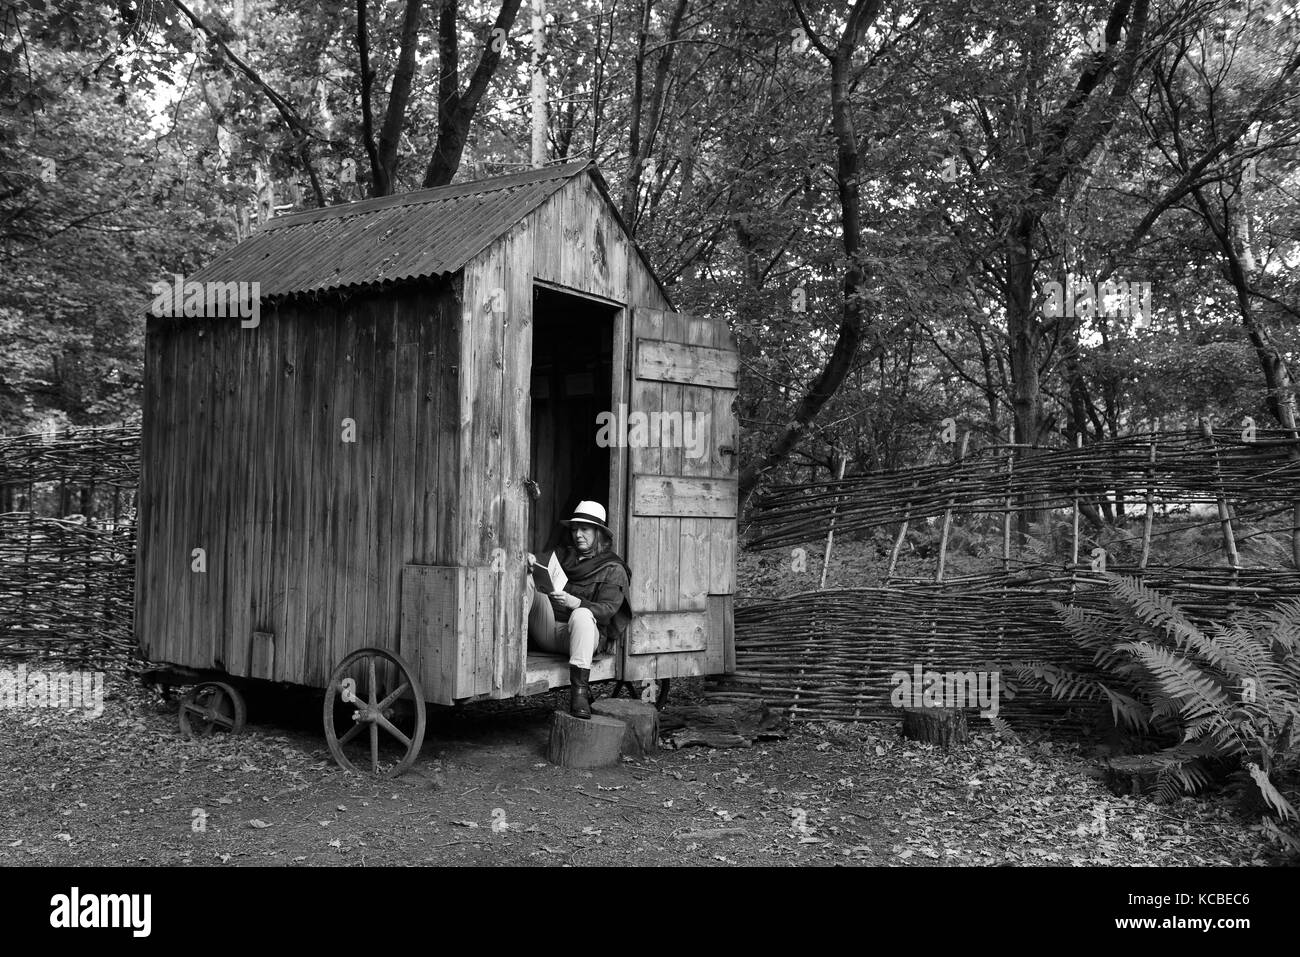 Woman relaxing with book on woodland garden shed on wheels Britain Uk secluded seclusion isolation hideaway rural retreat Stock Photo